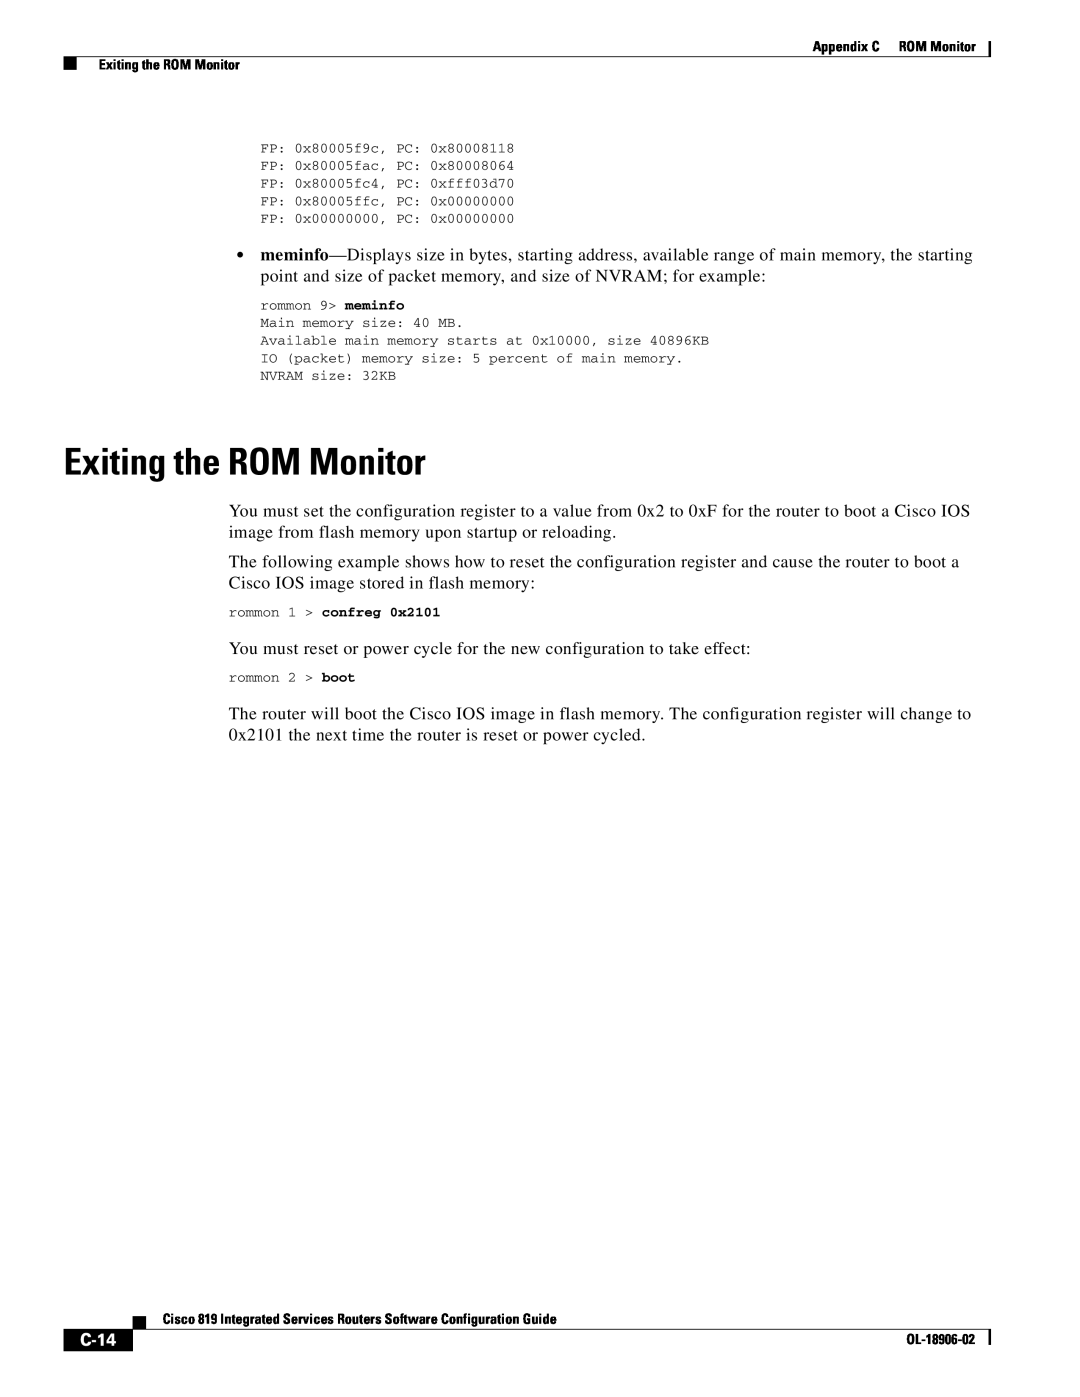 Cisco Systems C819GUK9, C819HG4GVK9 manual Exiting the ROM Monitor, C-14 